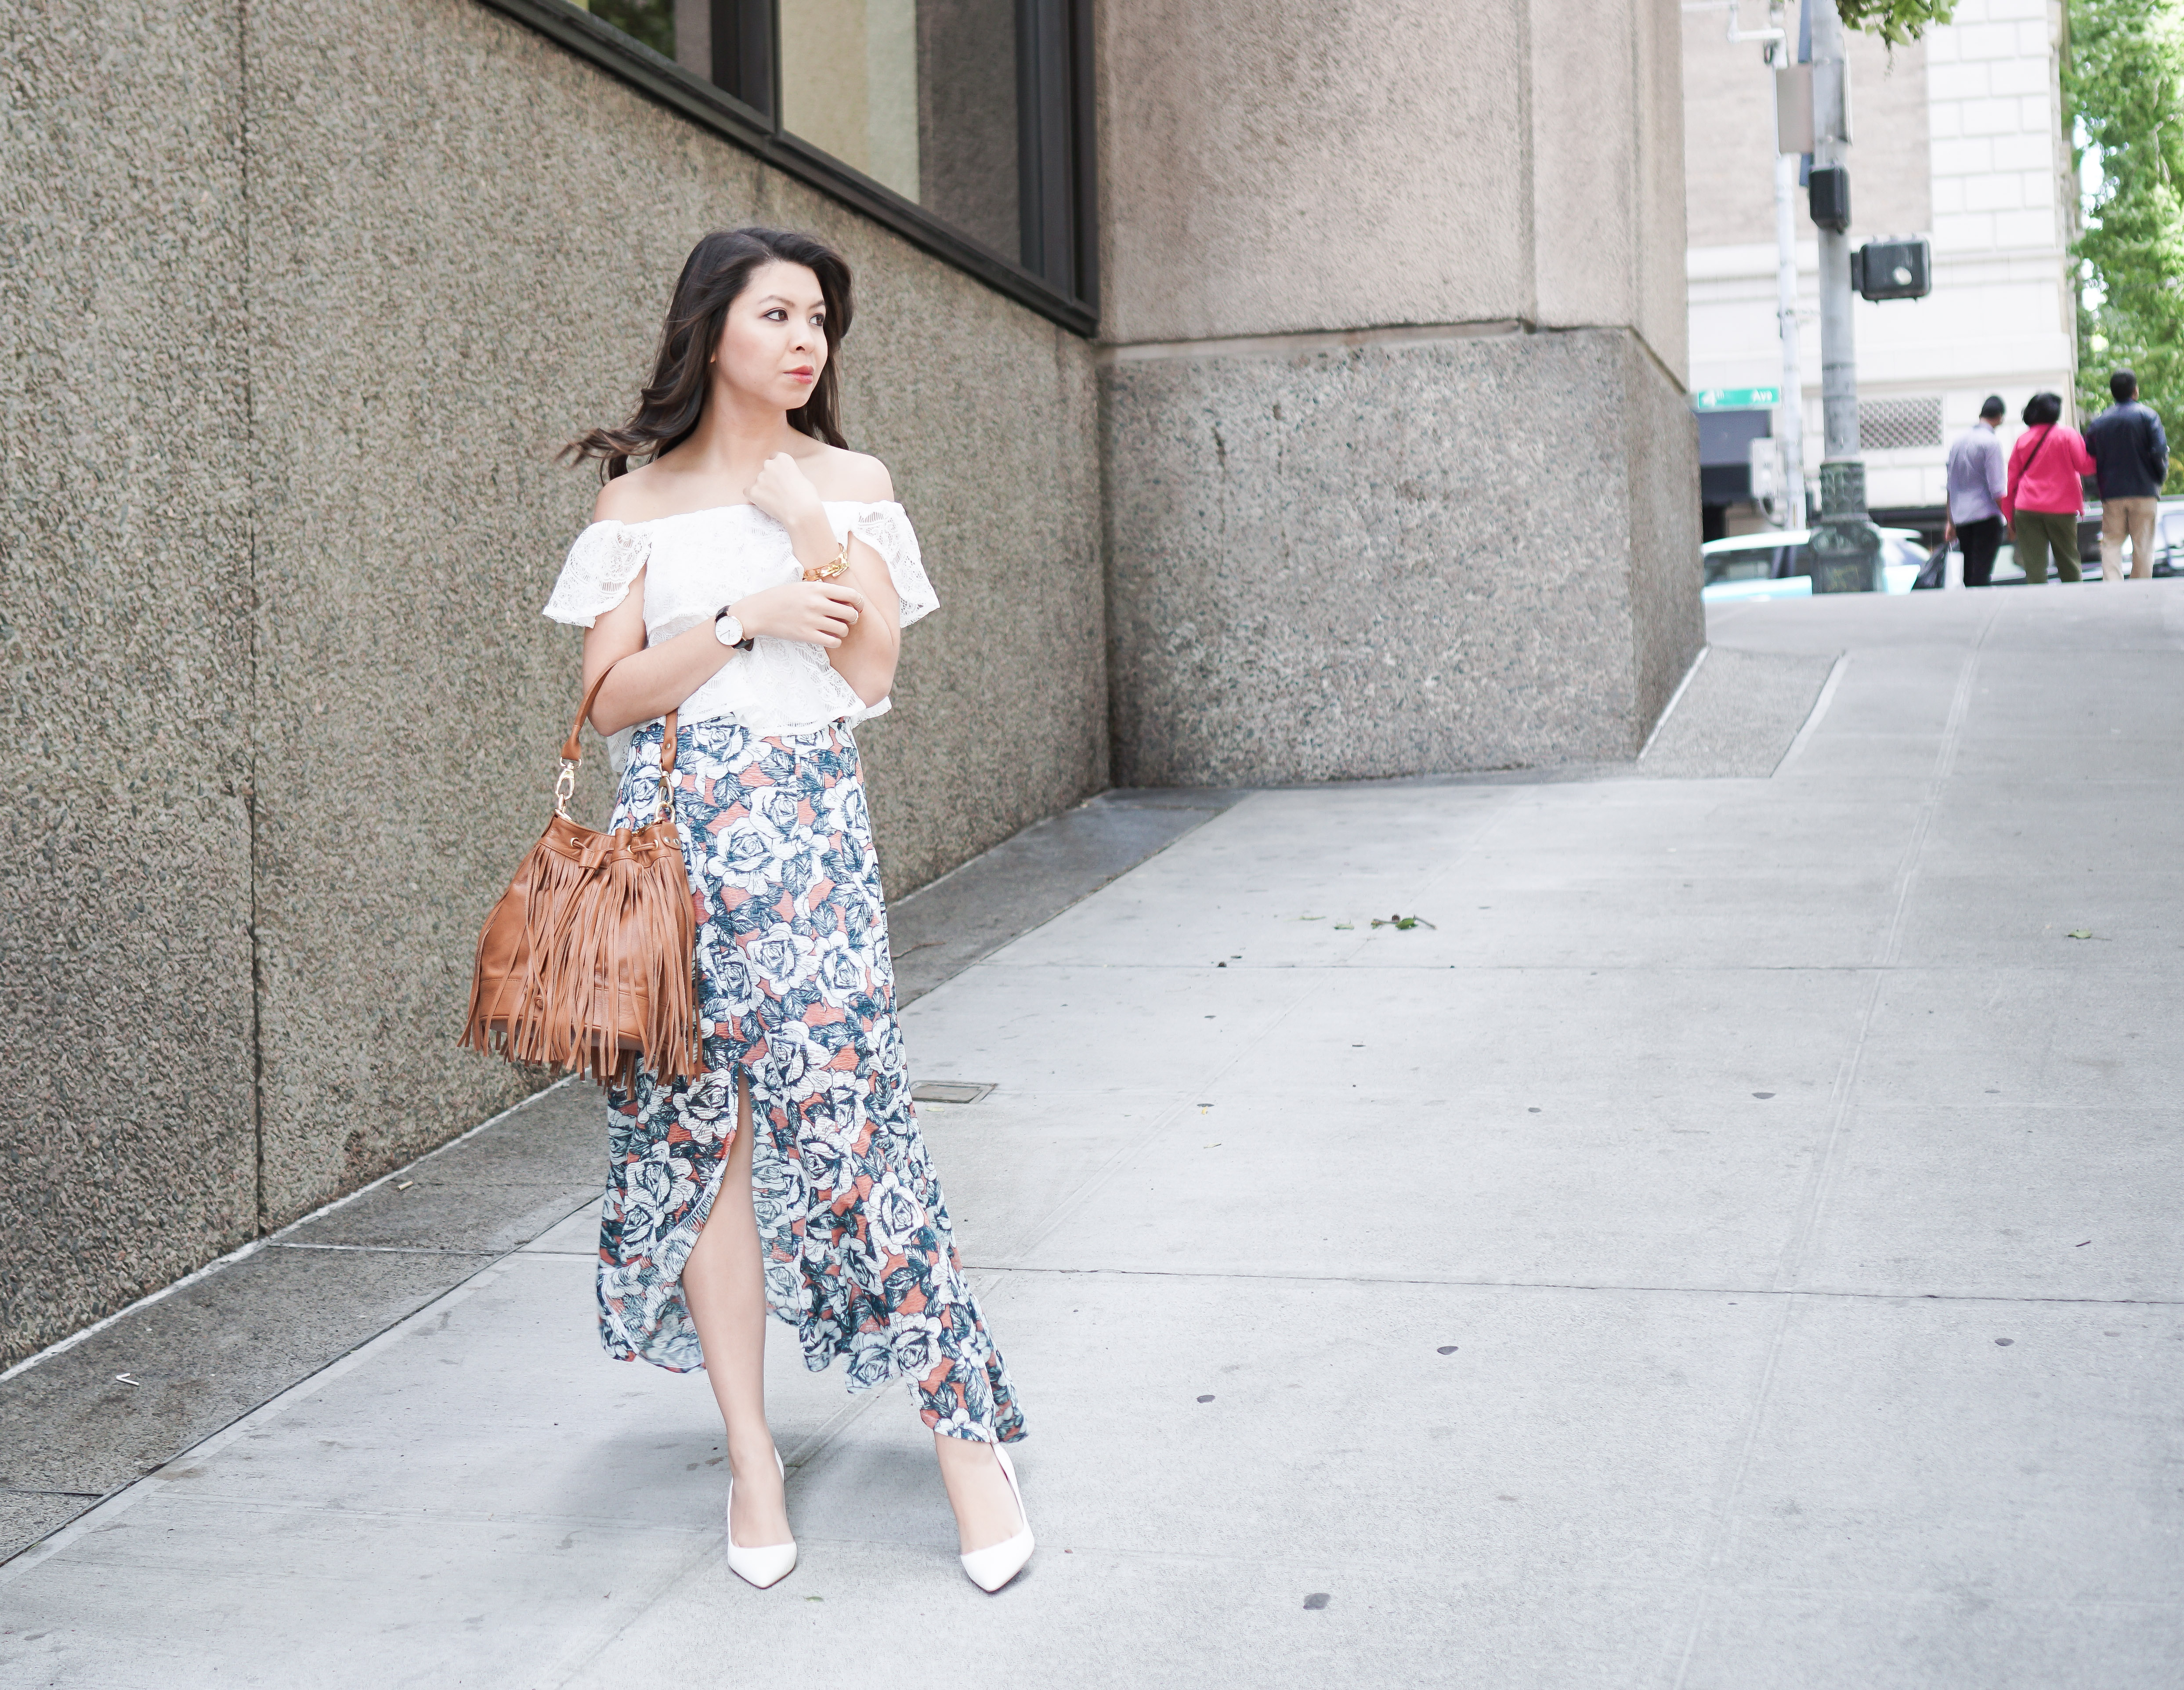 Zara floral print blouse with maxi skirt, Chic Wish nude pleated maxi skirt,  Stuart Weitzman Nudist stiletto sandals with maxi skirt, Louis Vuitton st.  germain shoulder bag in dune, how to wear